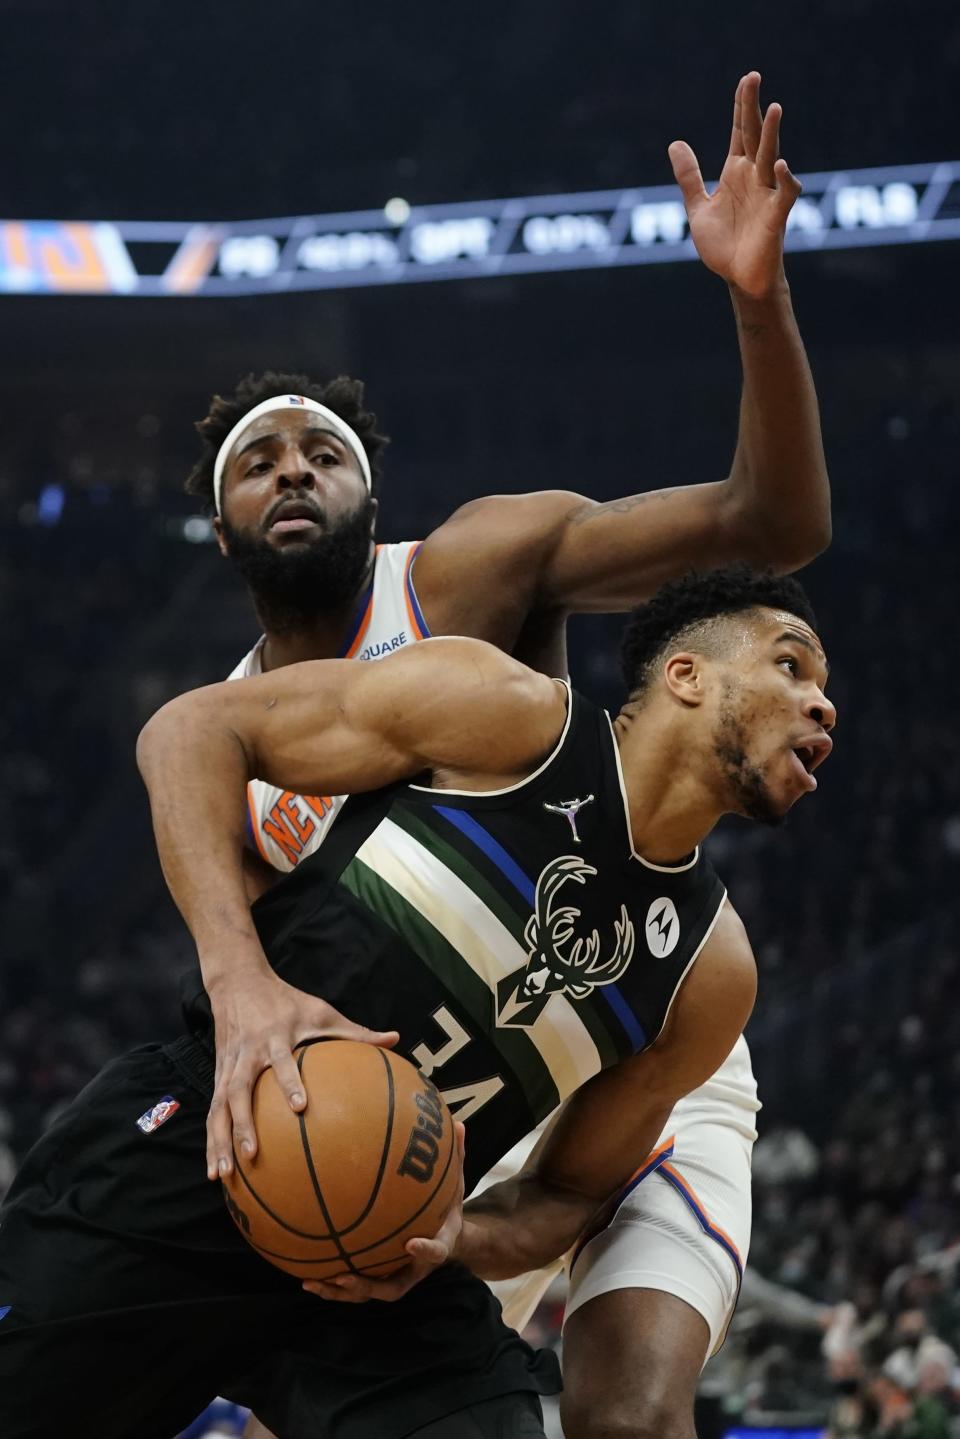 Milwaukee Bucks' Giannis Antetokounmpo is fouled by New York Knicks' Mitchell Robinson during the first half of an NBA basketball game Friday, Jan. 28, 2022, in Milwaukee. (AP Photo/Morry Gash)